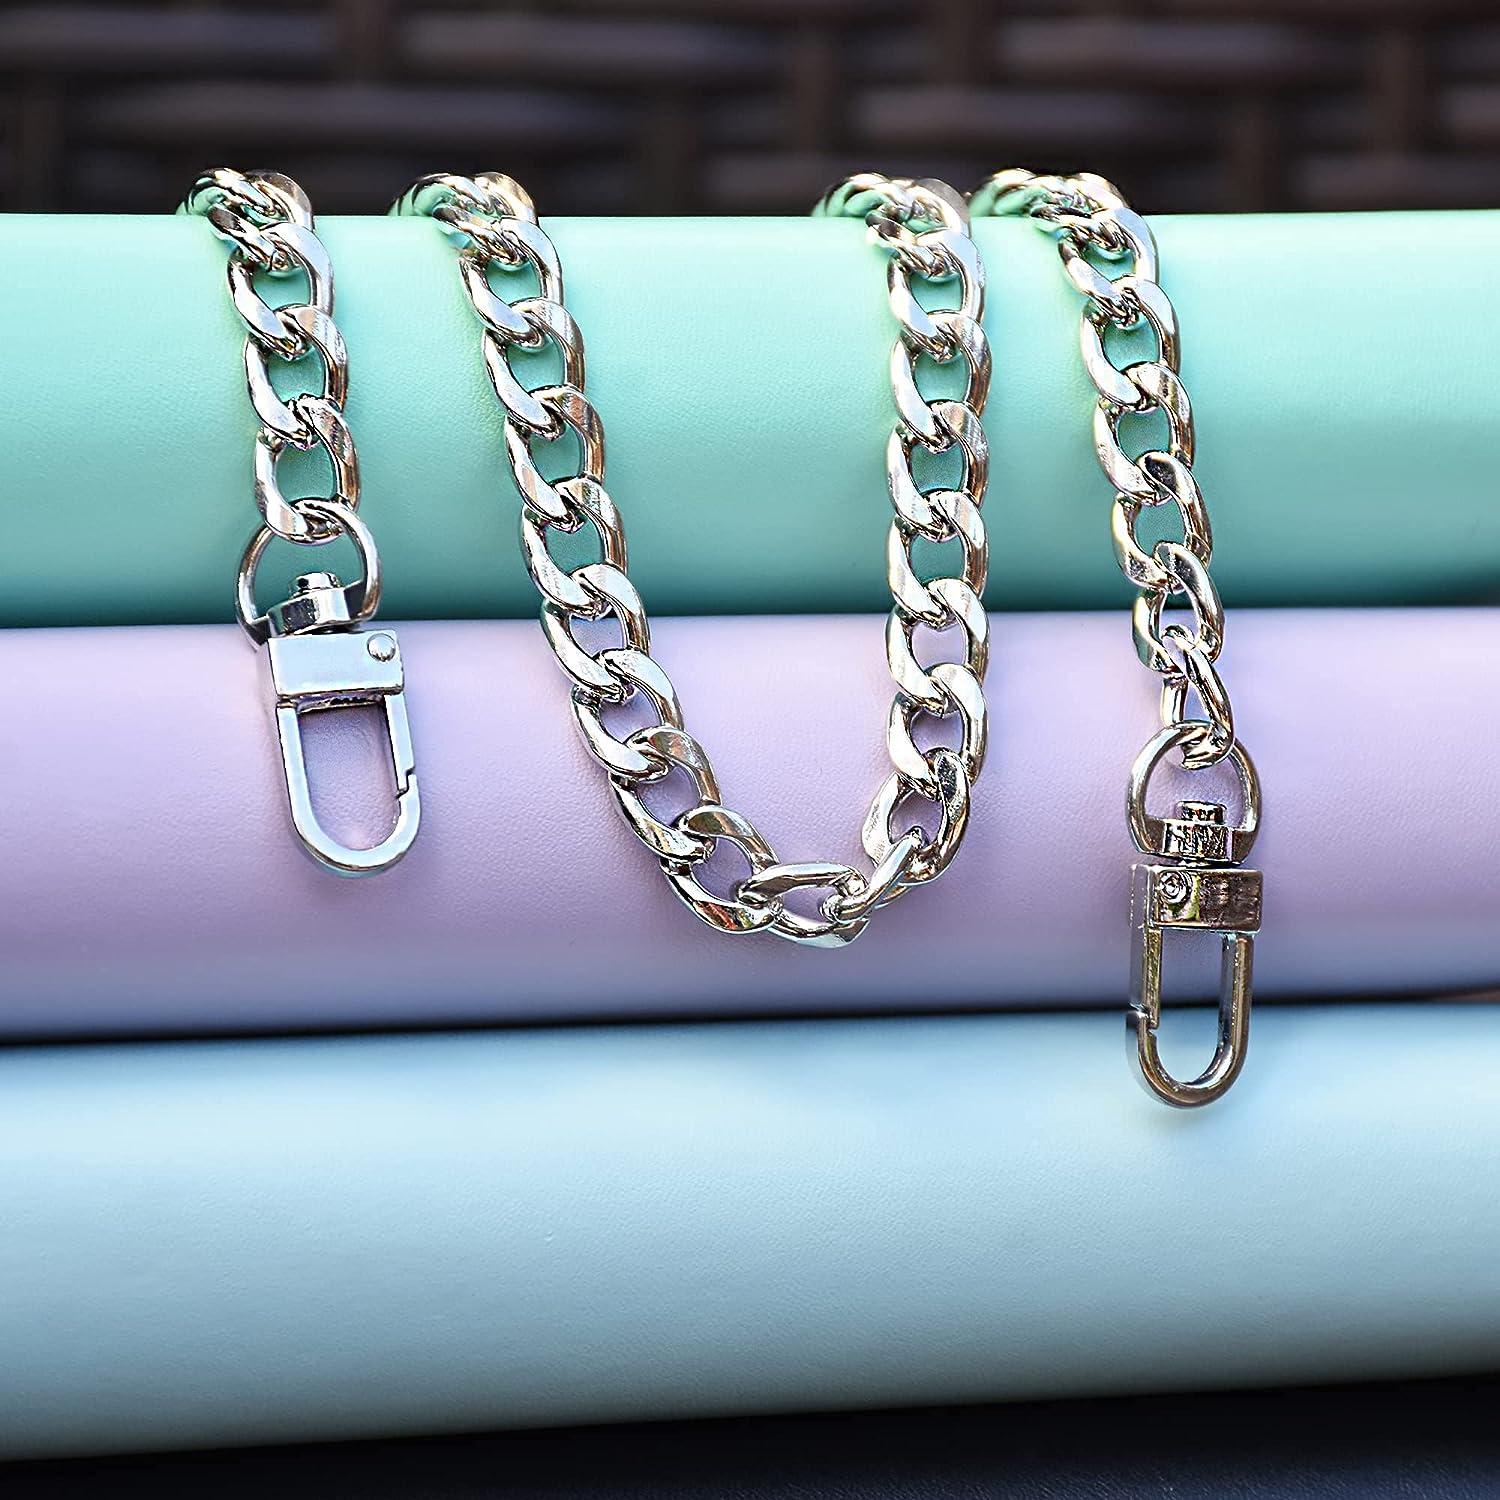 Yuronam 4 Different Sizes Flat Purse Chain Iron Bag Link Chains Shoulder Straps  Chains with Metal Buckles Hook for Replacement, DIY Handbags Crafts,  47.2/31.5/15.7/7.9 Inches(Silver) Multi size Silver